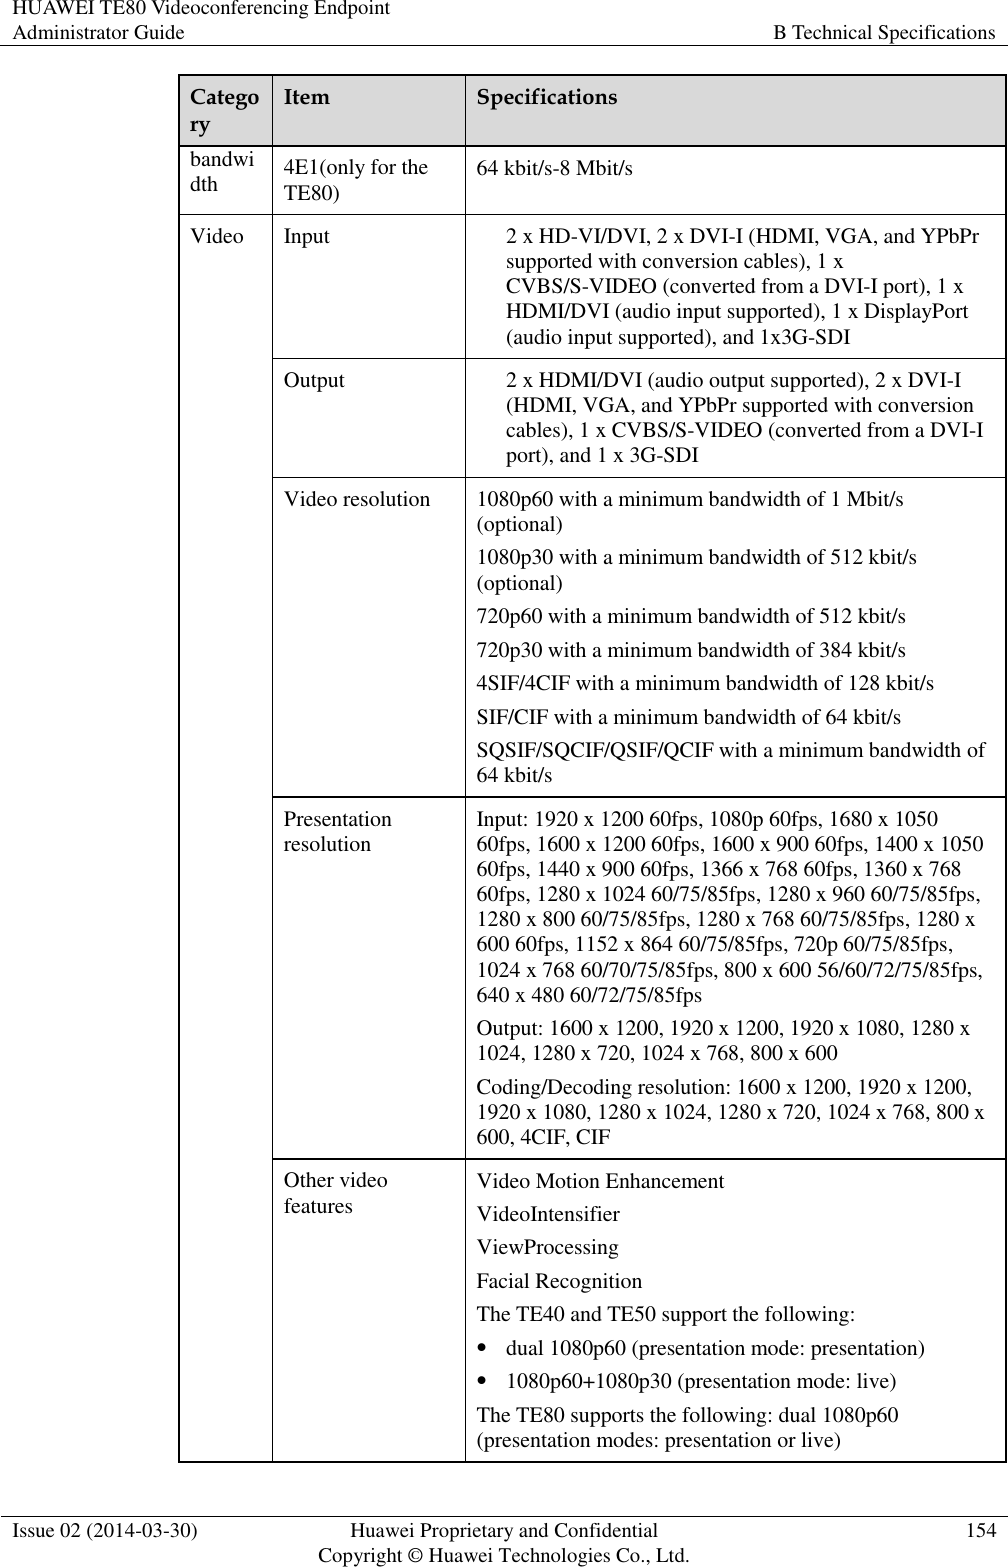 HUAWEI TE80 Videoconferencing Endpoint Administrator Guide B Technical Specifications  Issue 02 (2014-03-30) Huawei Proprietary and Confidential Copyright © Huawei Technologies Co., Ltd. 154  Category Item Specifications bandwidth 4E1(only for the TE80) 64 kbit/s-8 Mbit/s Video Input 2 x HD-VI/DVI, 2 x DVI-I (HDMI, VGA, and YPbPr supported with conversion cables), 1 x CVBS/S-VIDEO (converted from a DVI-I port), 1 x HDMI/DVI (audio input supported), 1 x DisplayPort (audio input supported), and 1x3G-SDI Output 2 x HDMI/DVI (audio output supported), 2 x DVI-I (HDMI, VGA, and YPbPr supported with conversion cables), 1 x CVBS/S-VIDEO (converted from a DVI-I port), and 1 x 3G-SDI Video resolution 1080p60 with a minimum bandwidth of 1 Mbit/s (optional) 1080p30 with a minimum bandwidth of 512 kbit/s (optional) 720p60 with a minimum bandwidth of 512 kbit/s 720p30 with a minimum bandwidth of 384 kbit/s 4SIF/4CIF with a minimum bandwidth of 128 kbit/s SIF/CIF with a minimum bandwidth of 64 kbit/s SQSIF/SQCIF/QSIF/QCIF with a minimum bandwidth of 64 kbit/s Presentation resolution Input: 1920 x 1200 60fps, 1080p 60fps, 1680 x 1050 60fps, 1600 x 1200 60fps, 1600 x 900 60fps, 1400 x 1050 60fps, 1440 x 900 60fps, 1366 x 768 60fps, 1360 x 768 60fps, 1280 x 1024 60/75/85fps, 1280 x 960 60/75/85fps, 1280 x 800 60/75/85fps, 1280 x 768 60/75/85fps, 1280 x 600 60fps, 1152 x 864 60/75/85fps, 720p 60/75/85fps, 1024 x 768 60/70/75/85fps, 800 x 600 56/60/72/75/85fps, 640 x 480 60/72/75/85fps Output: 1600 x 1200, 1920 x 1200, 1920 x 1080, 1280 x 1024, 1280 x 720, 1024 x 768, 800 x 600 Coding/Decoding resolution: 1600 x 1200, 1920 x 1200, 1920 x 1080, 1280 x 1024, 1280 x 720, 1024 x 768, 800 x 600, 4CIF, CIF Other video features Video Motion Enhancement VideoIntensifier ViewProcessing Facial Recognition The TE40 and TE50 support the following:  dual 1080p60 (presentation mode: presentation)  1080p60+1080p30 (presentation mode: live) The TE80 supports the following: dual 1080p60 (presentation modes: presentation or live) 